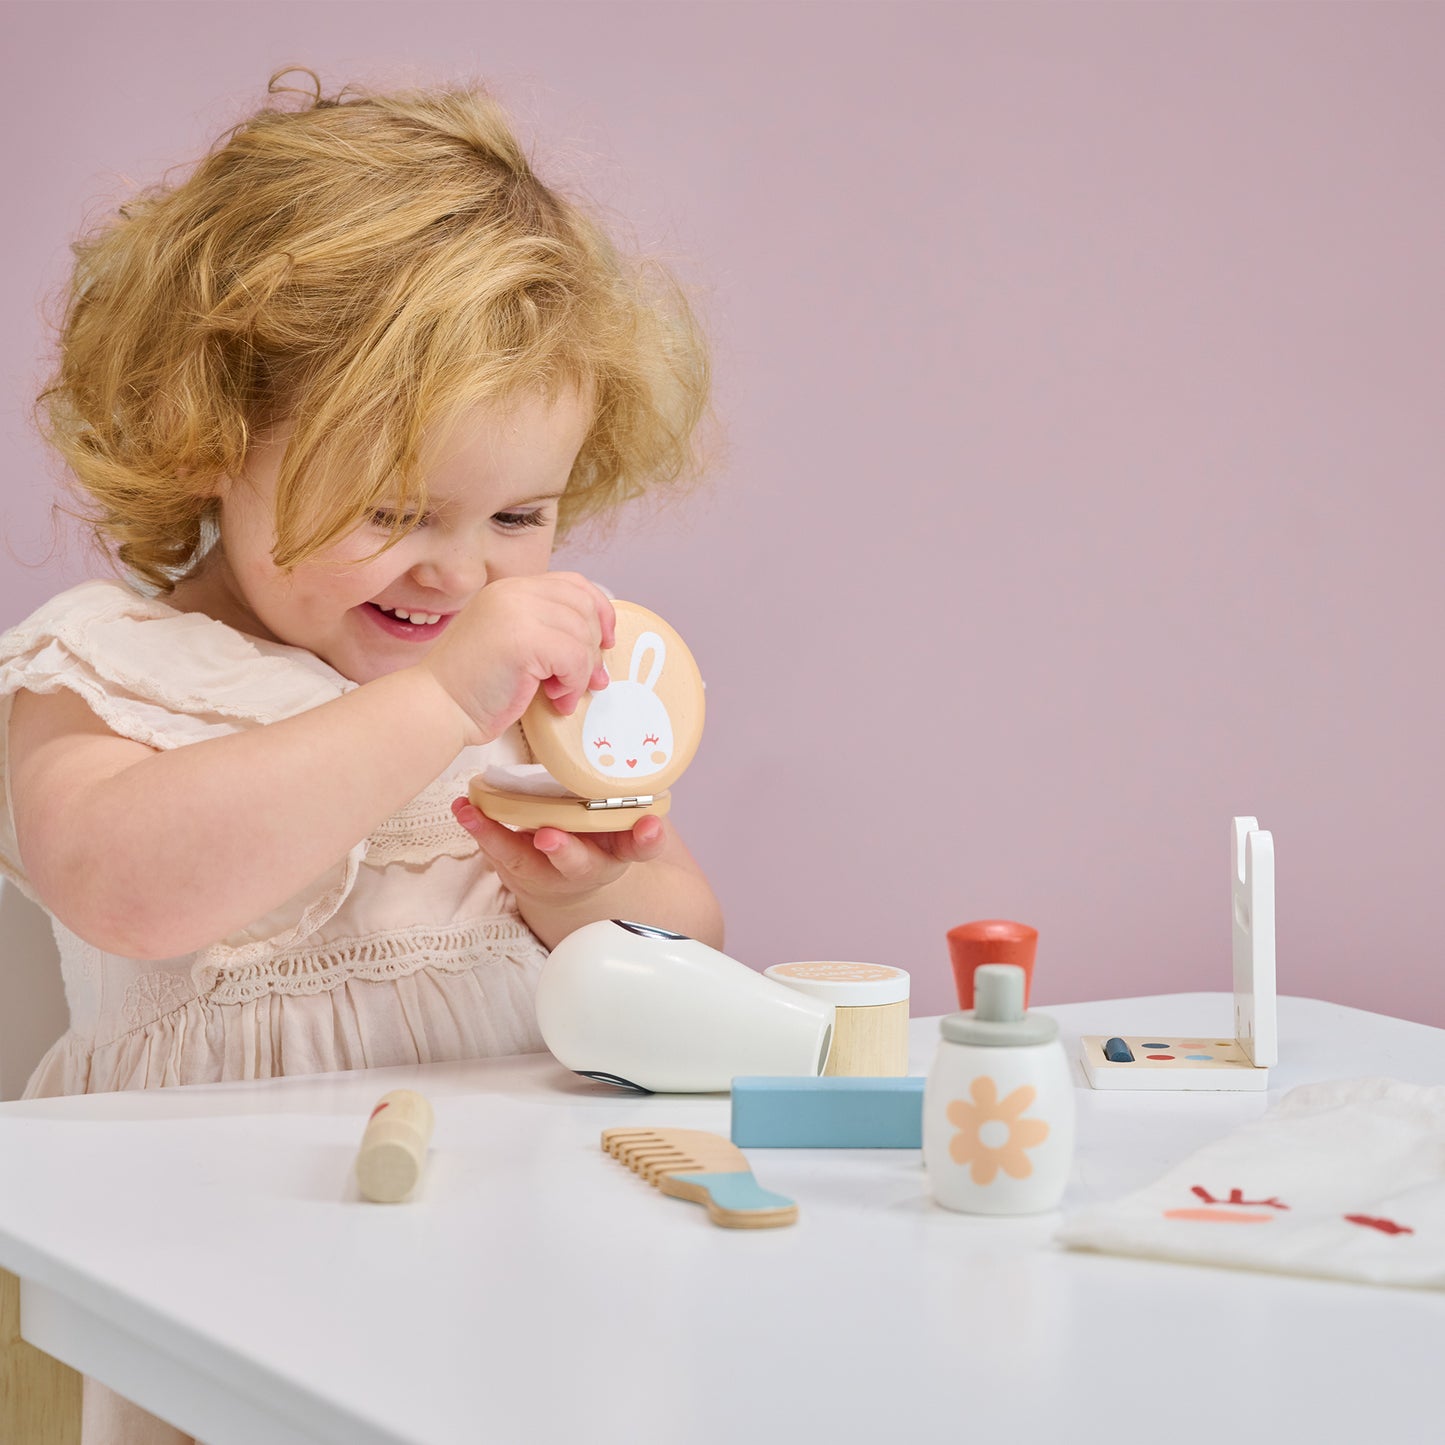 Child playing with wooden toy bunny themed make up set.  Looking in mirror.